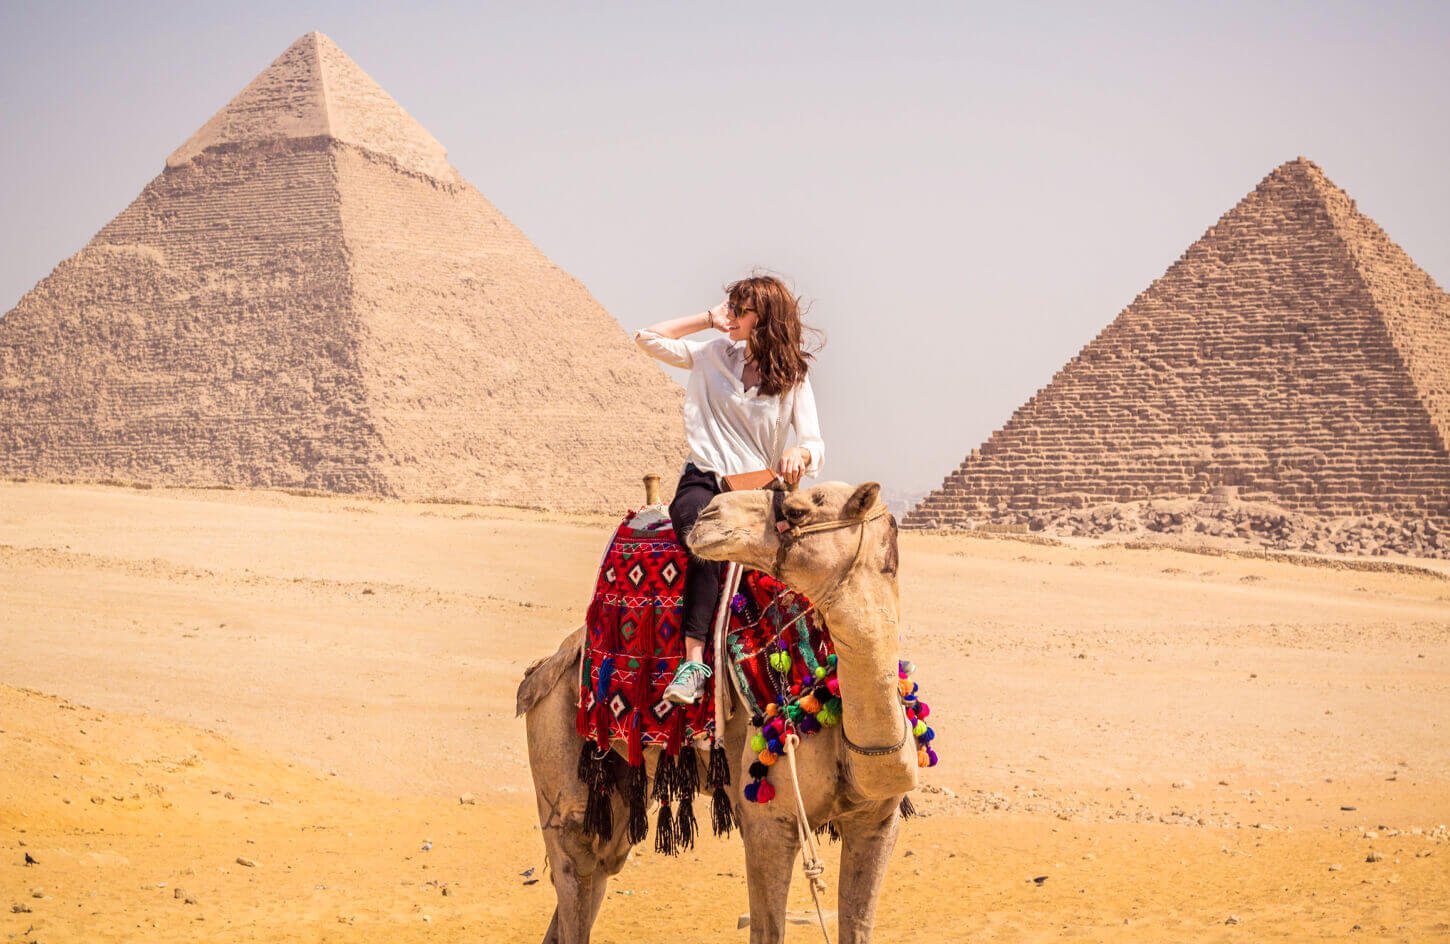 A-tourist-riding-a-camel-in-front-of-the-pyramids